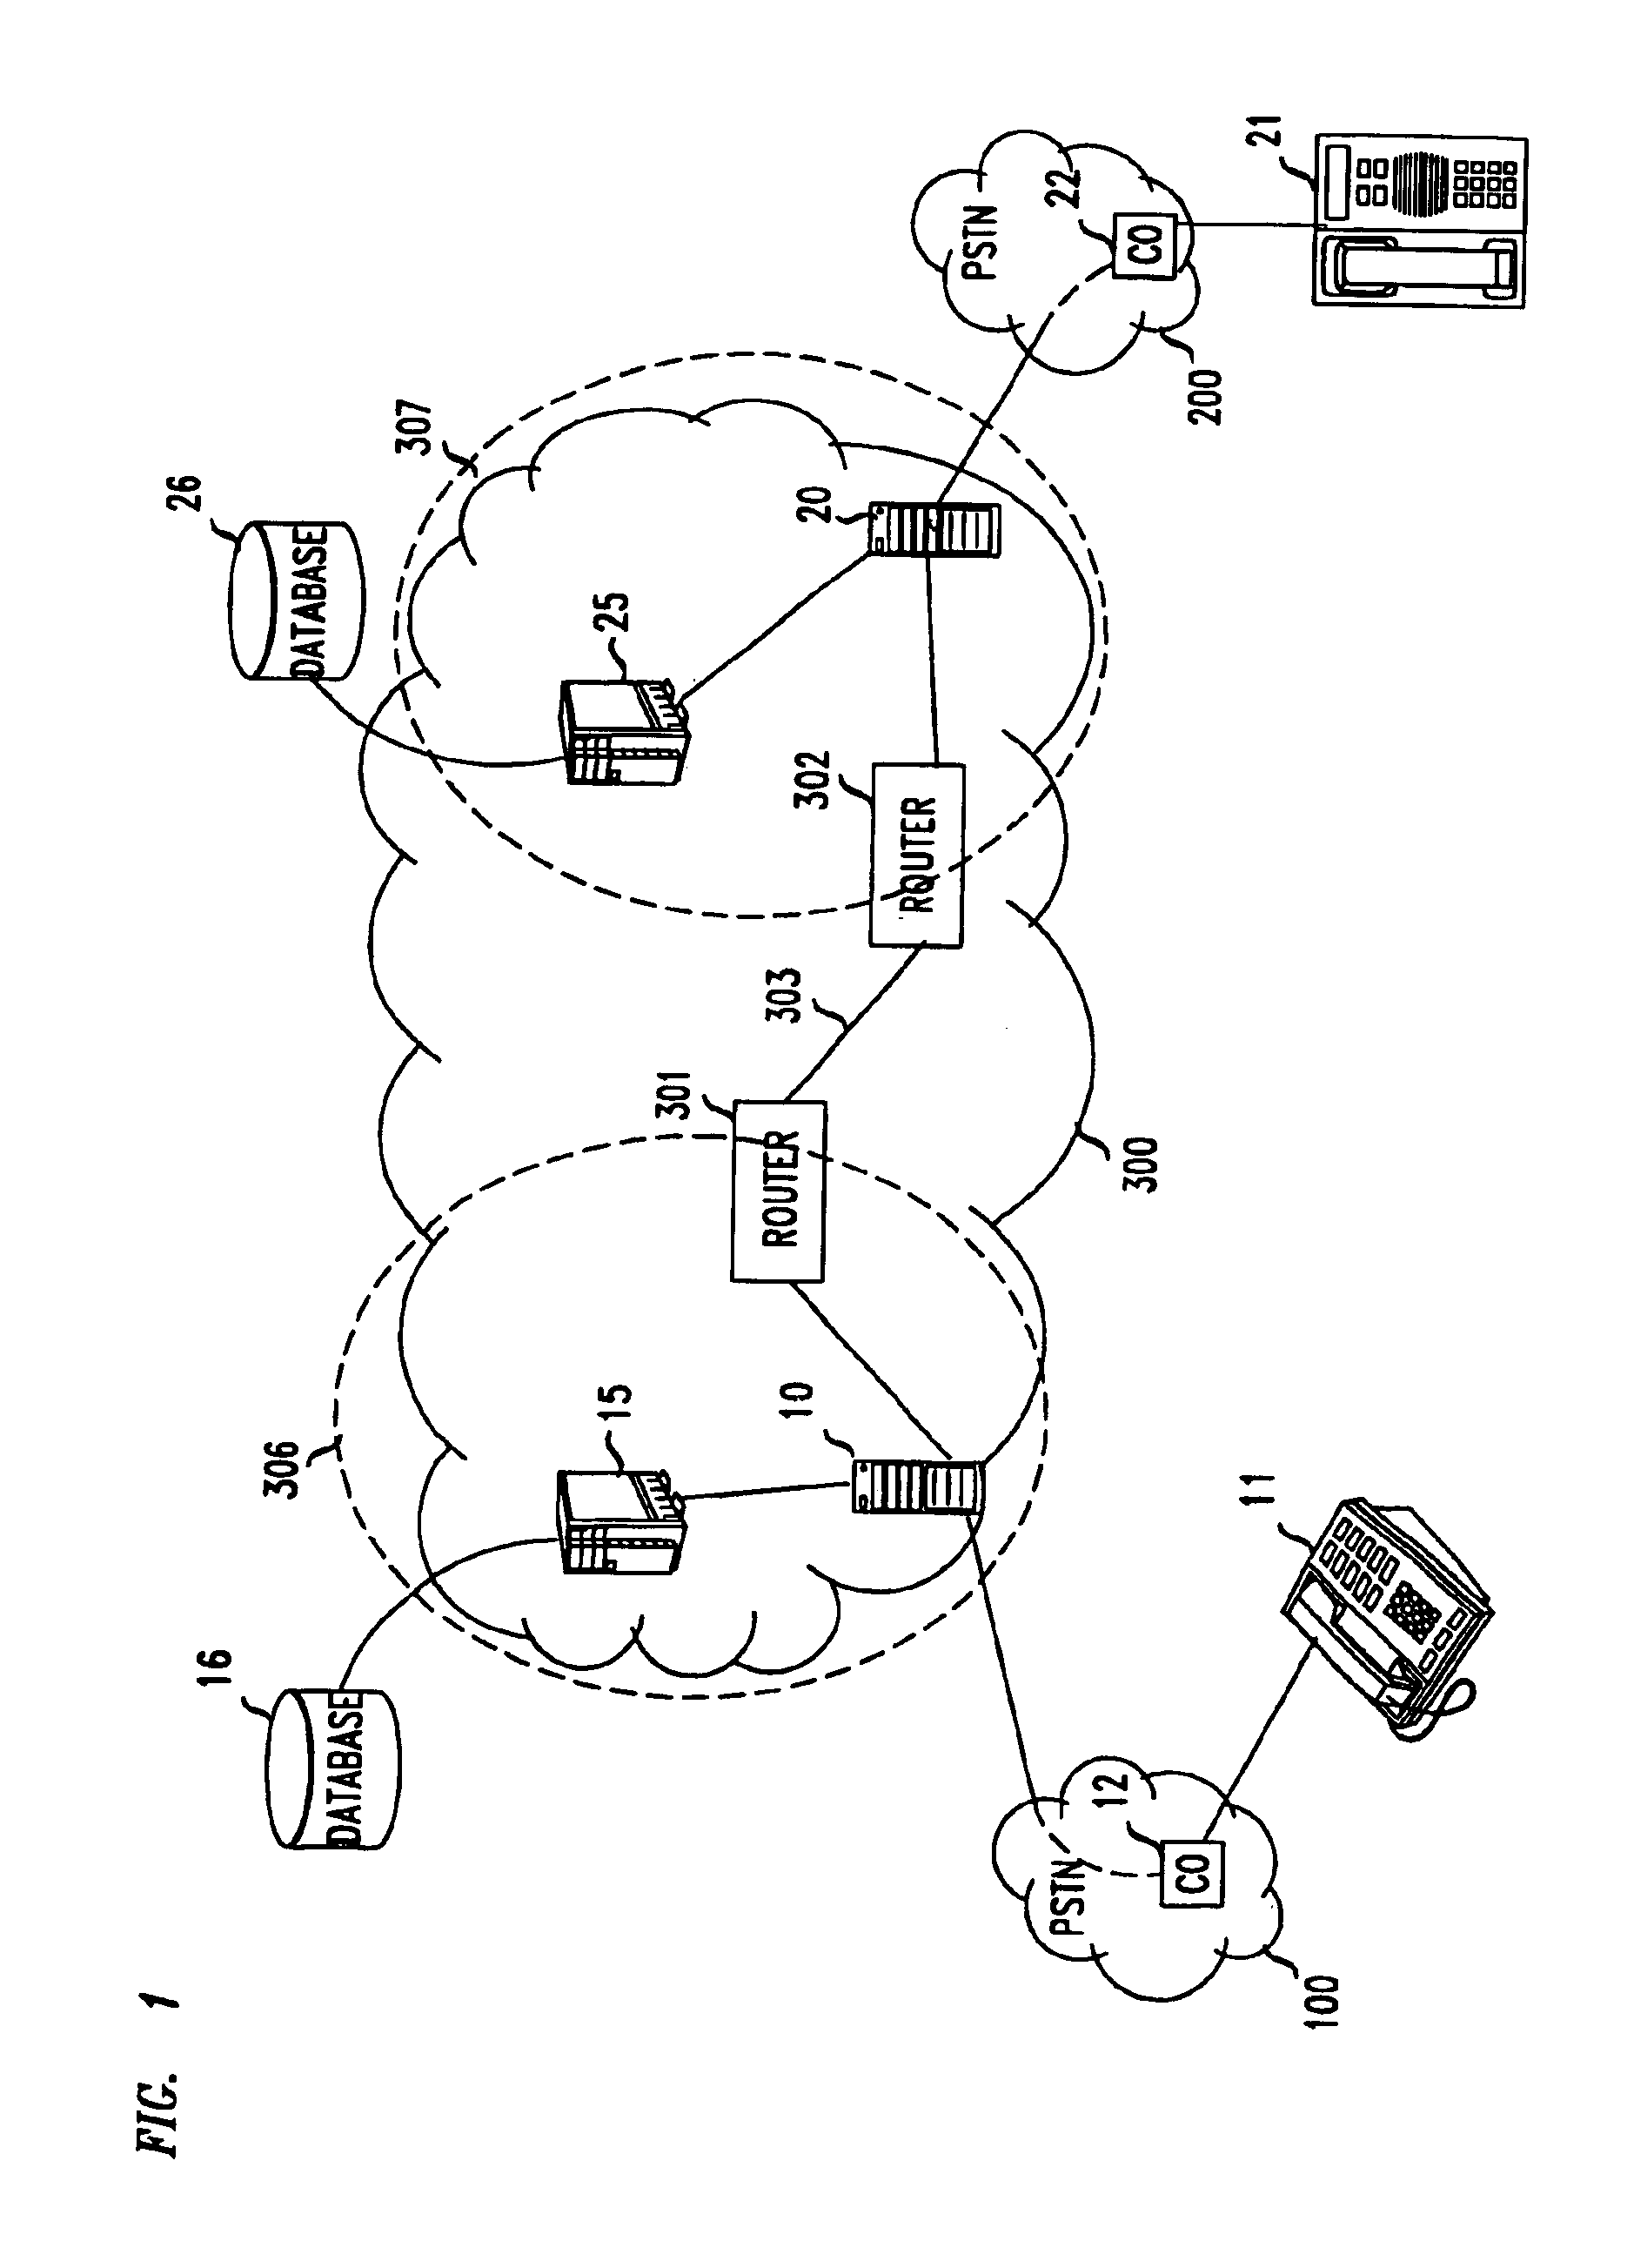 Controlled transmission across packet network